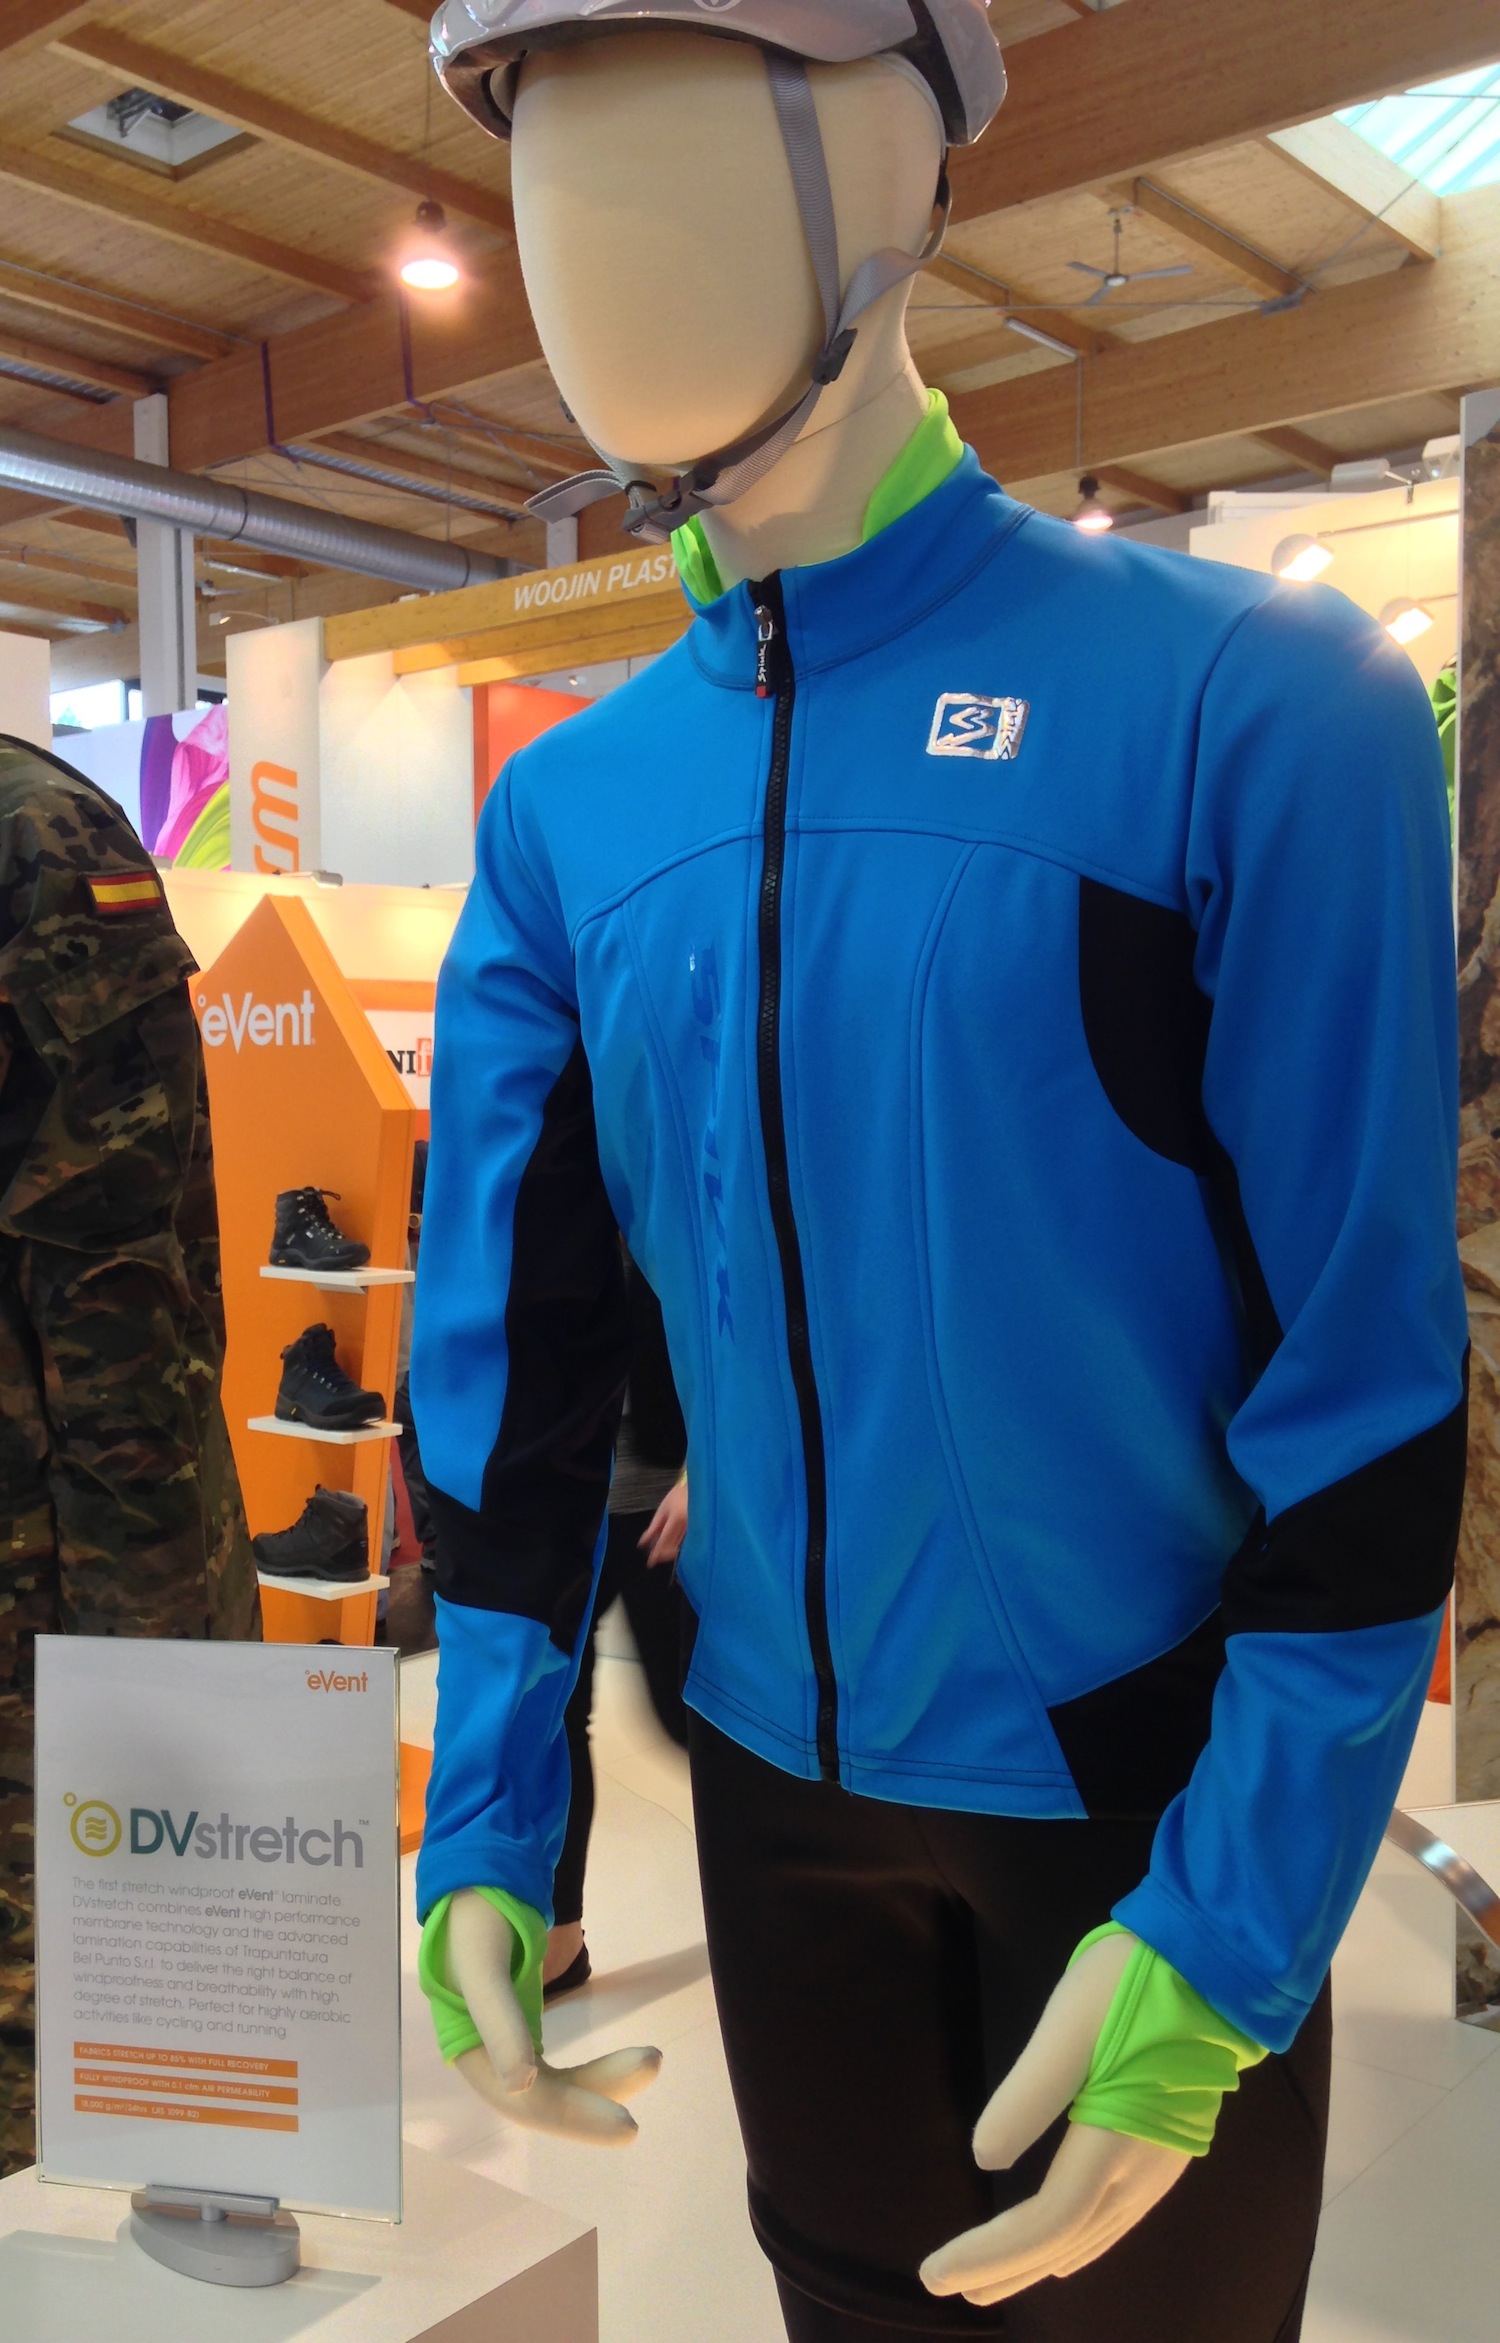 SPIUK Elite Winter Jacket with eVent DVStretch. © eVent fabrics